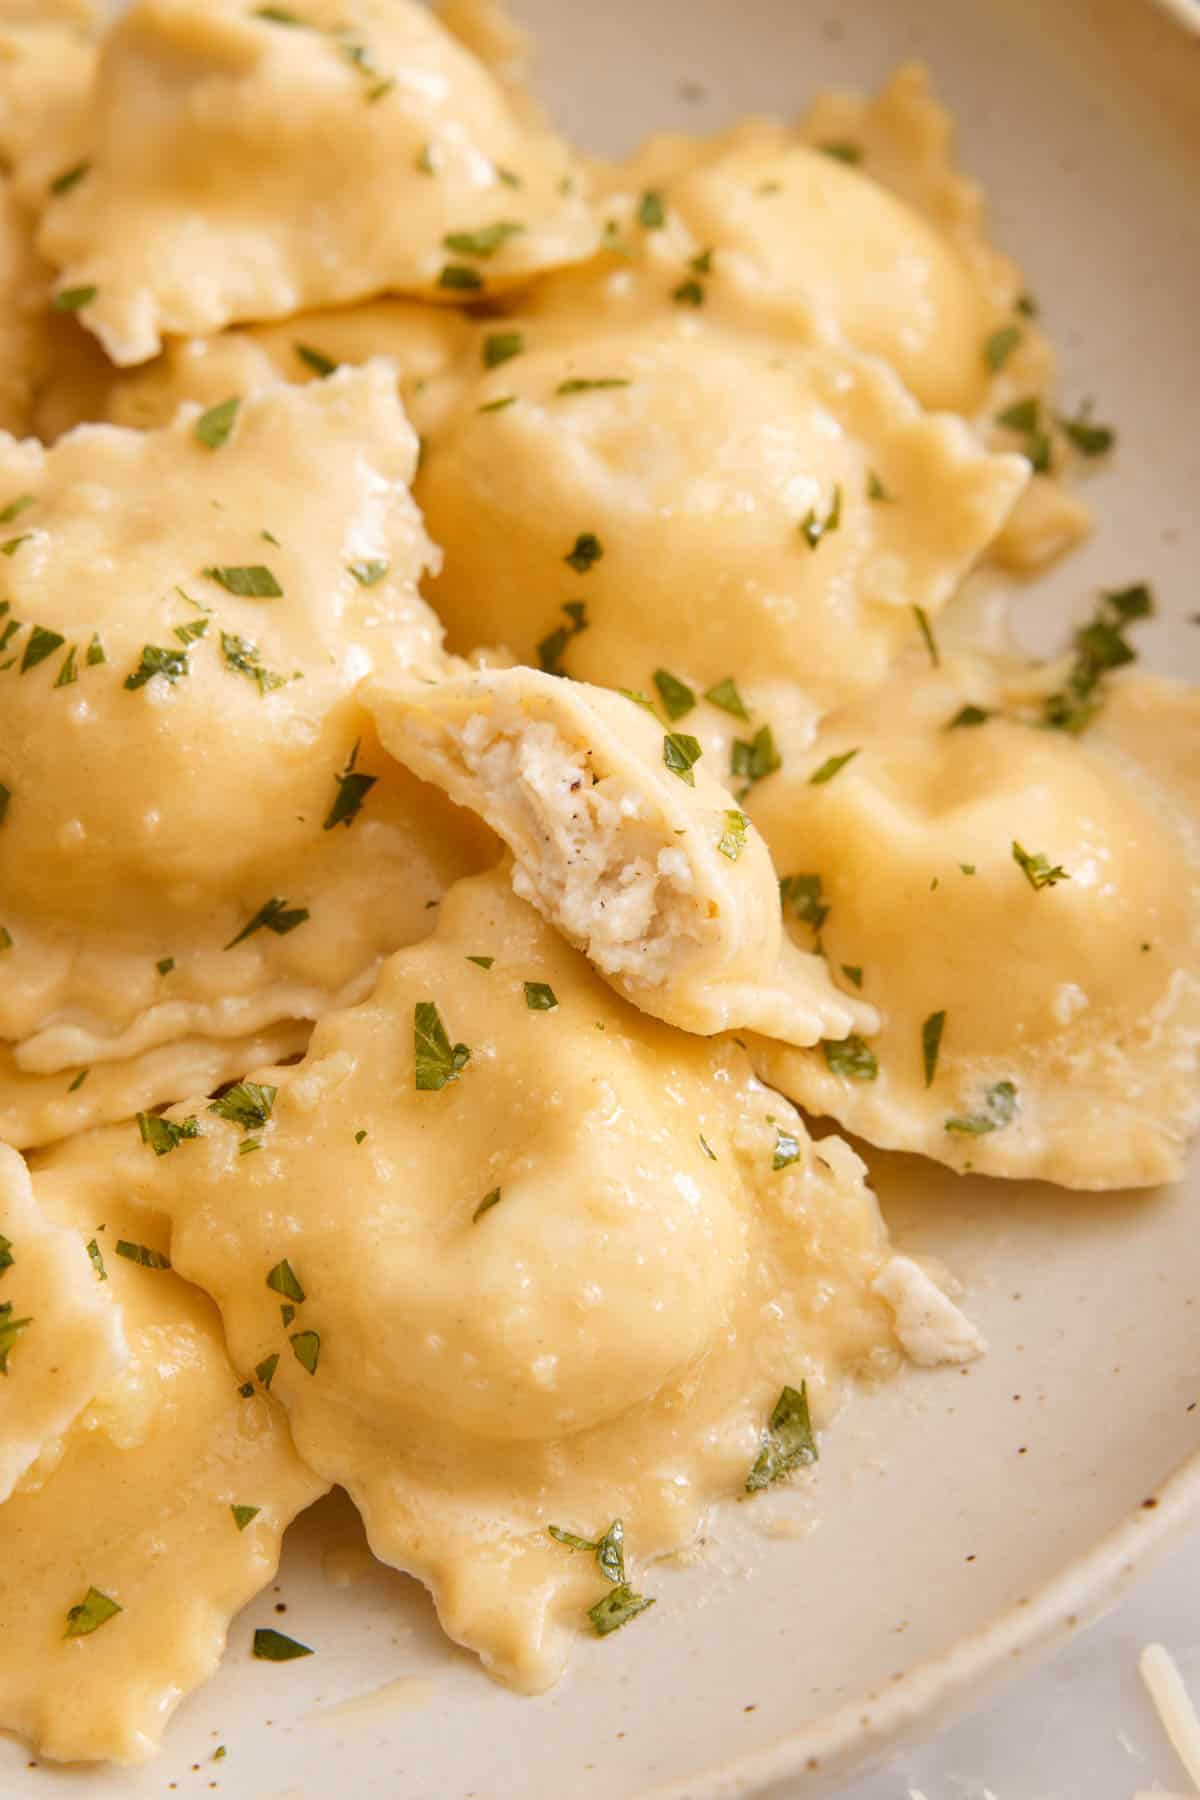 A close up view of a plate of cheese ravioli garnished with chopped parsley. One ravioli bitten in half, showing the cheese filling.